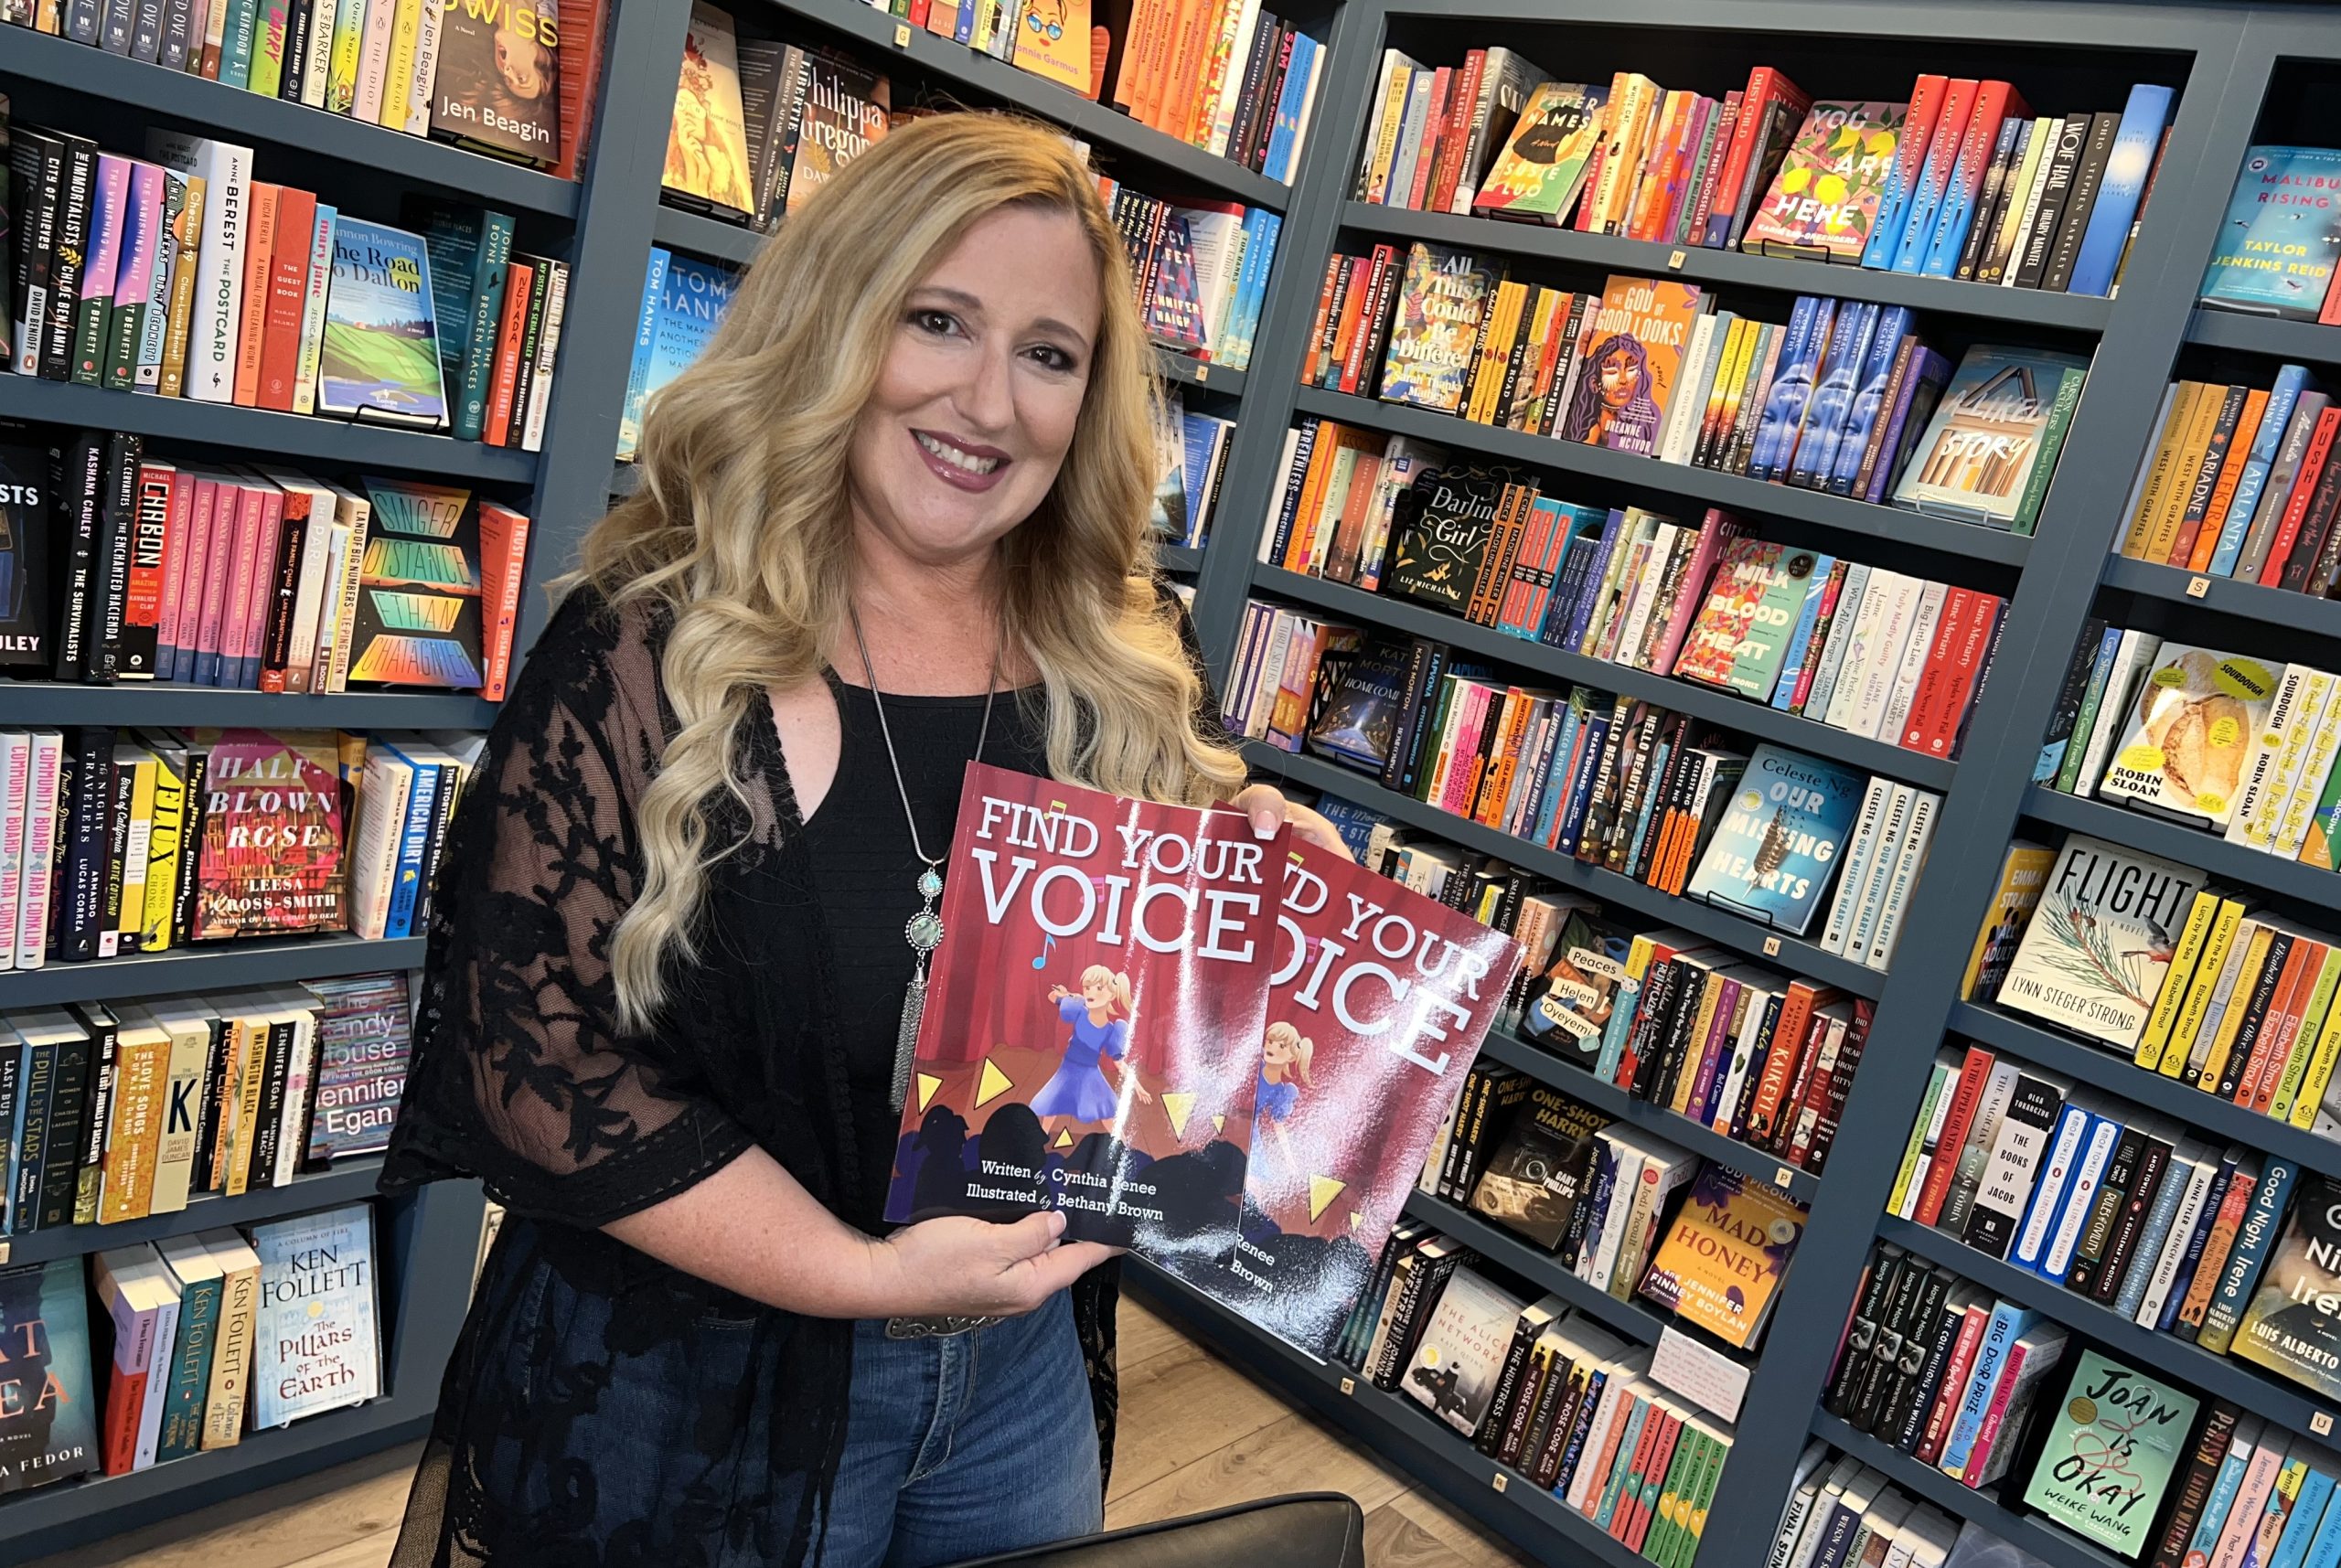 Folsom resident, recording artist to launch new children’s book at Folsom store Sunday